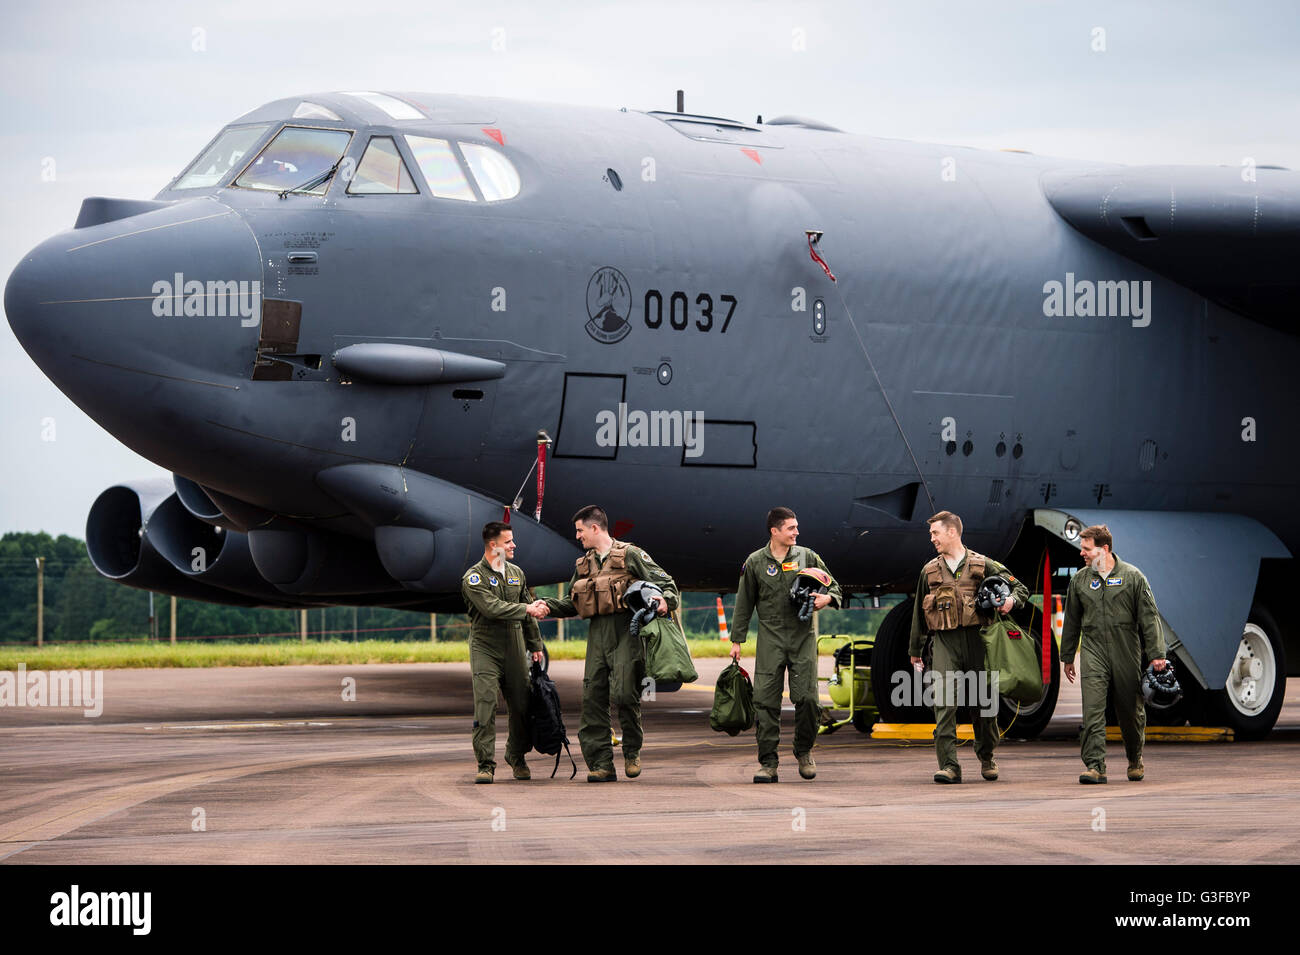 Crew members of a United States Air Force (USAF) Boeing B-52H Stratofortress strategic bomber of the 23d Bomb Squadron, parked on the pan at RAF Fairford airbase, as part of a US Air Force Global Strike Command deployment to Fairford, for military training exercises. Stock Photo